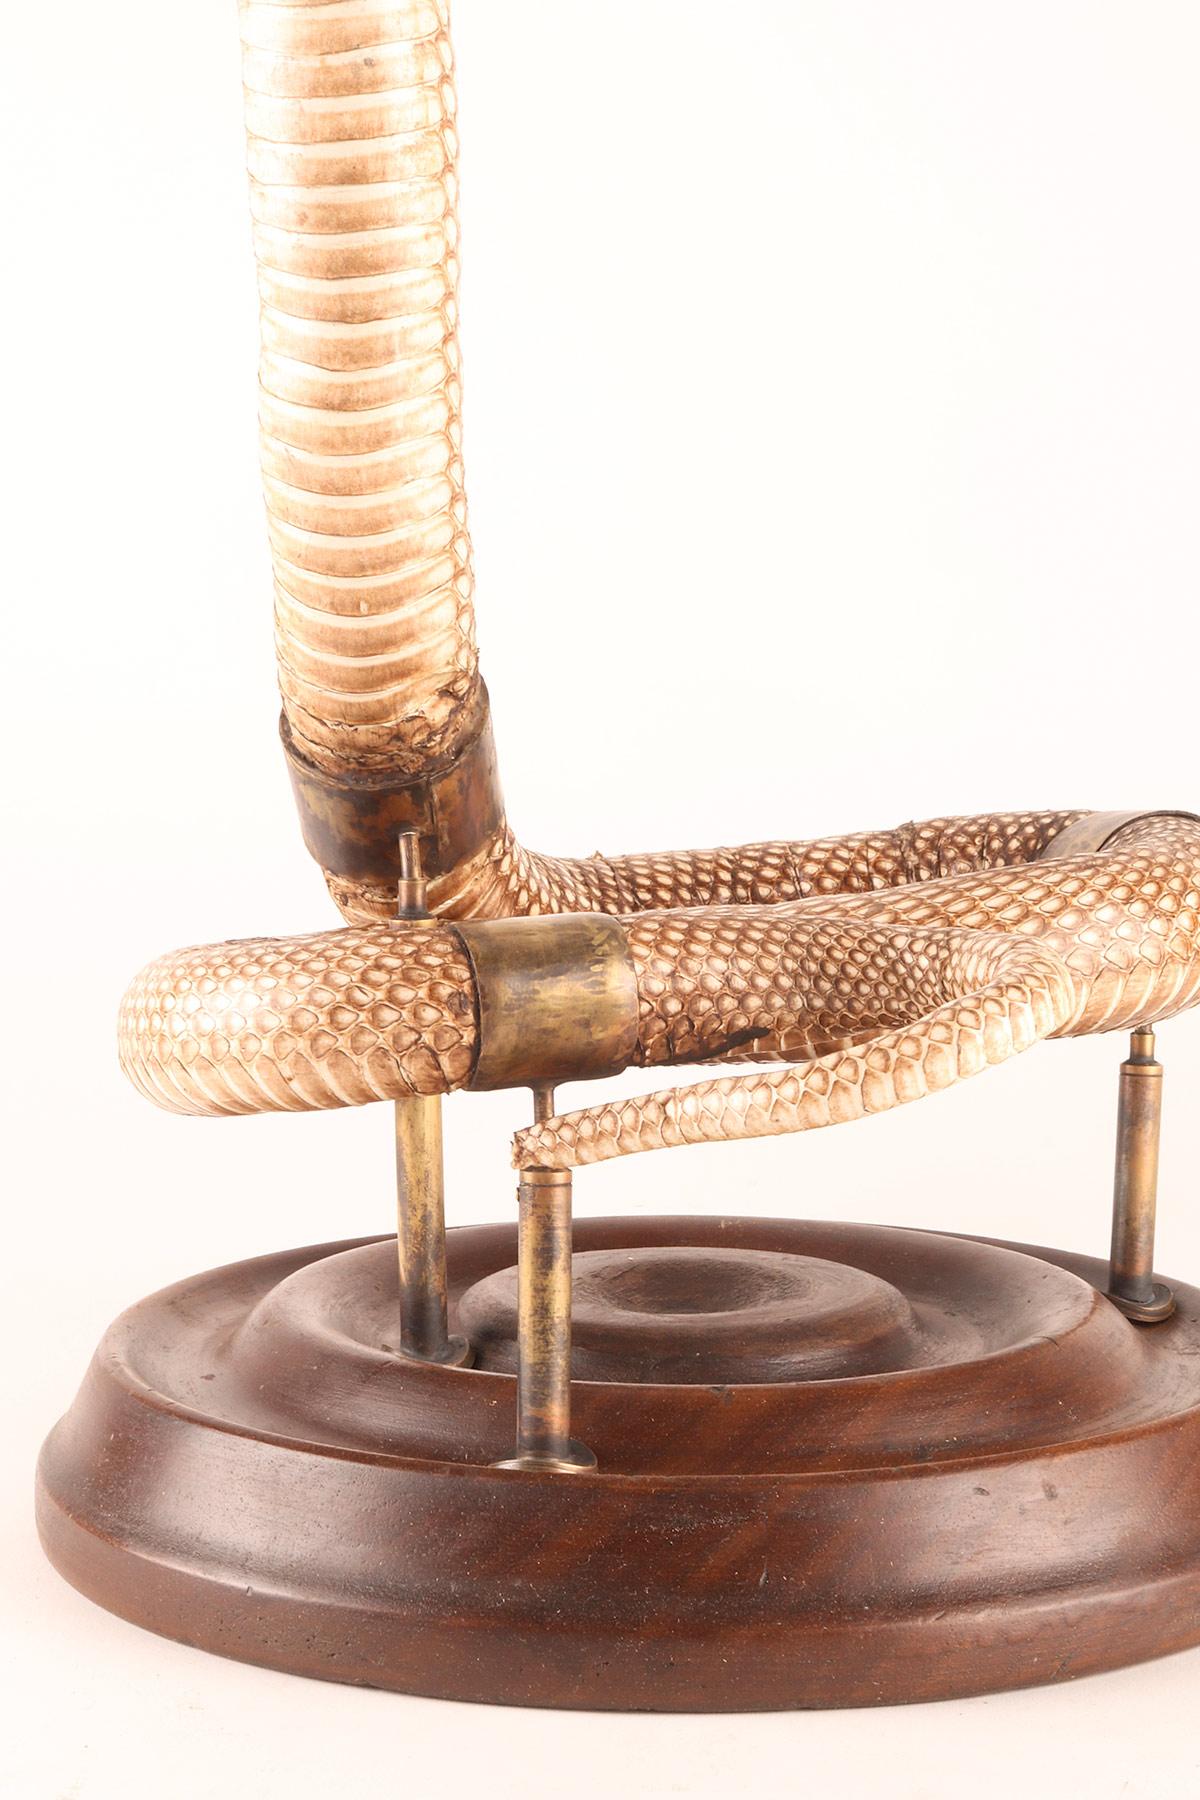 Brass A specimen of Hemachatus hemachatus snake taxidermy, Italy 1890. For Sale